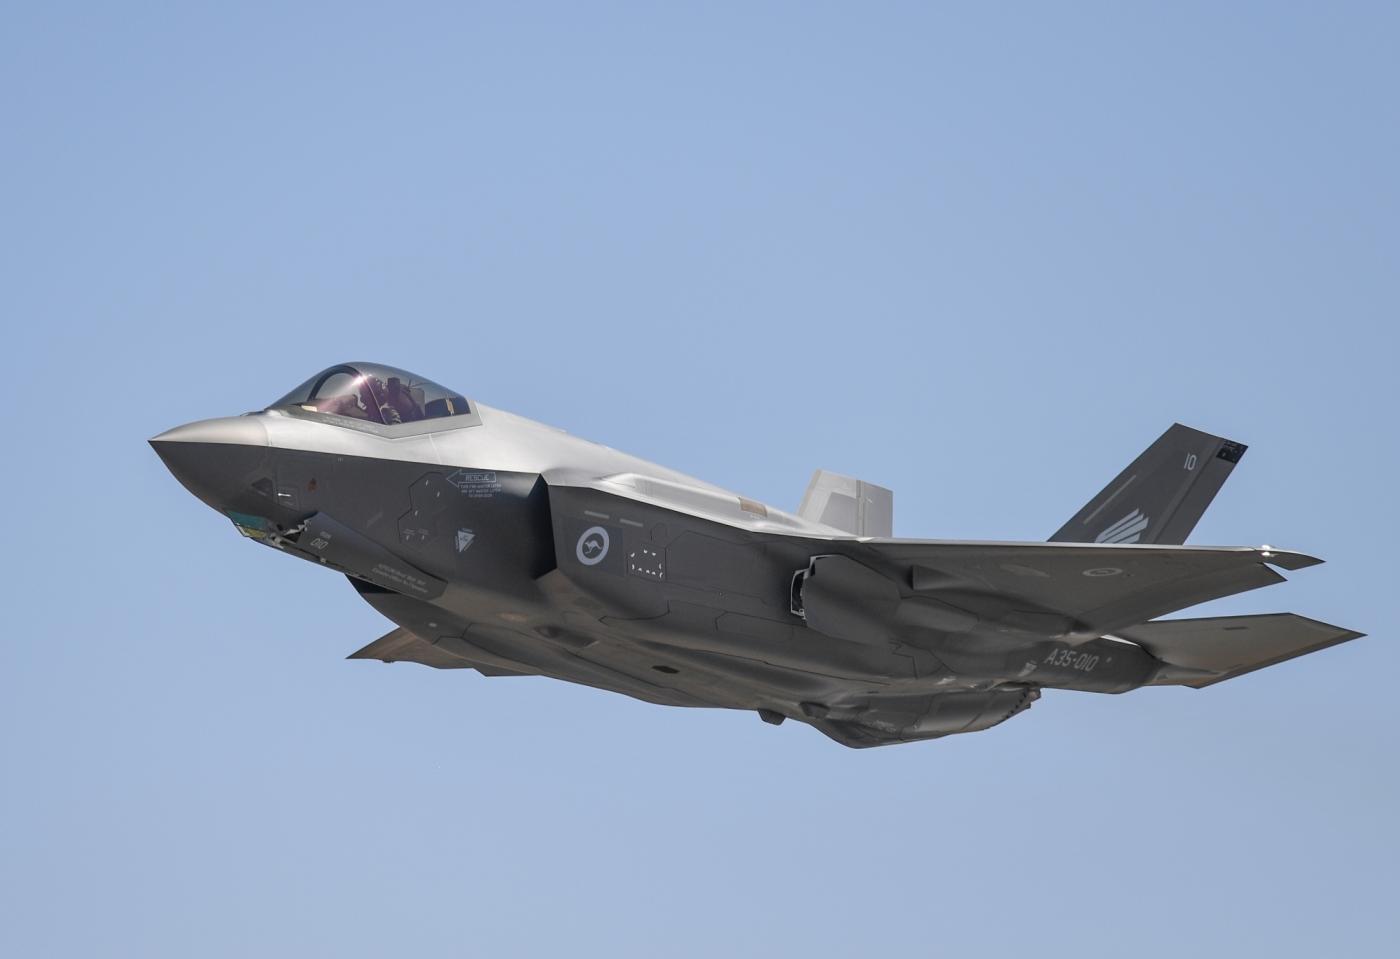 MELBOURNE, Feb. 28, 2019 (Xinhua) -- An Australian Defence Force F-35 performs during the Australian International Airshow and Aerospace & Defence Exposition at the Avalon Airport, Melbourne, on Feb. 28, 2019. (Xinhua/Bai Xuefei/IANS) by .